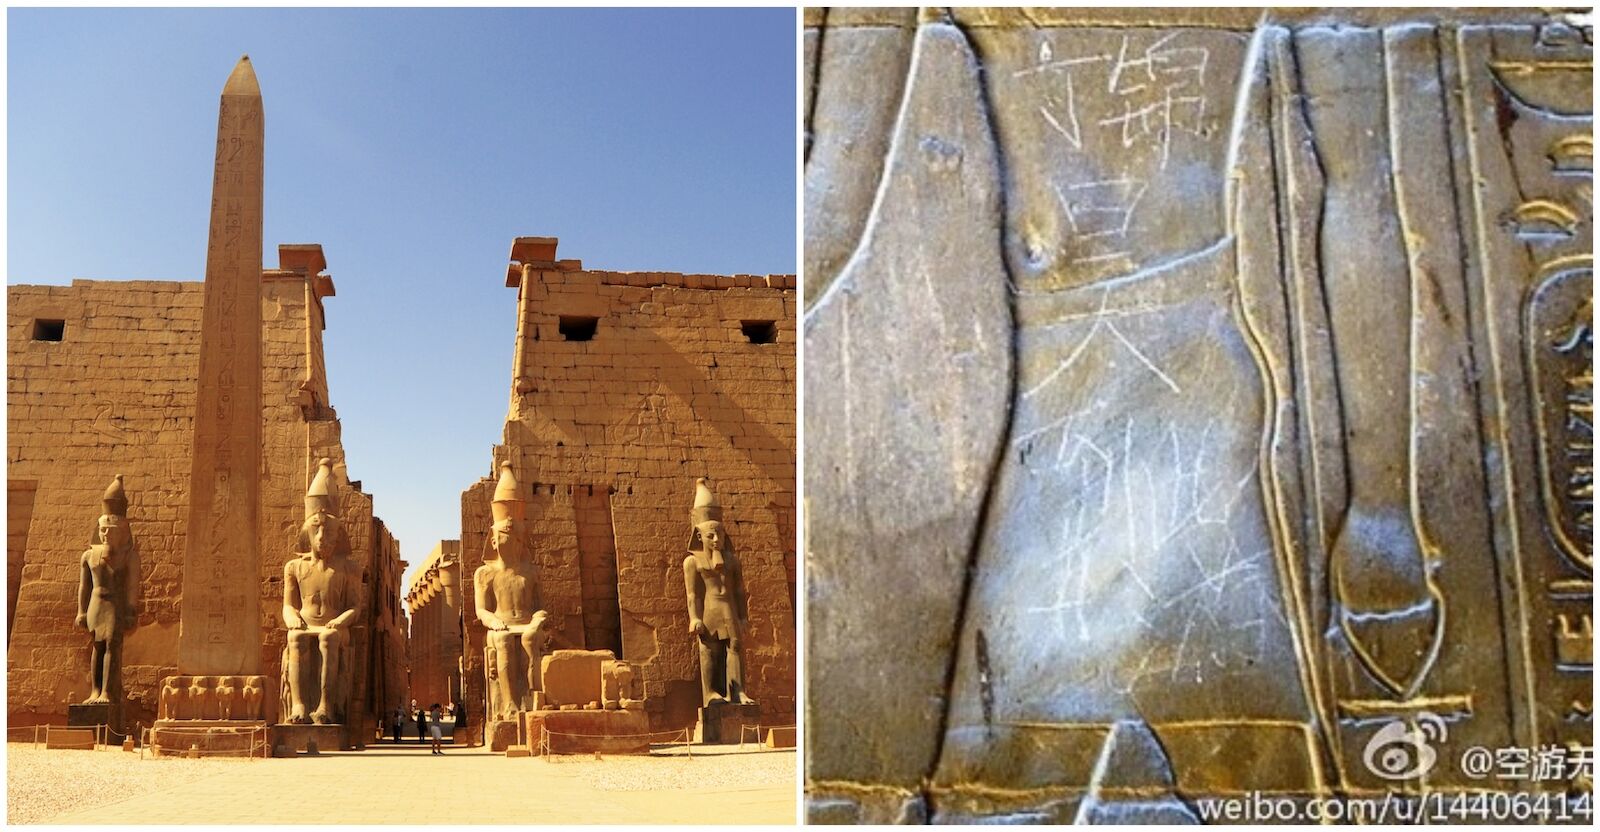 Graffitis made by a Chinese teenager on ancient Egyptian artwork at the Luxor temple complex.